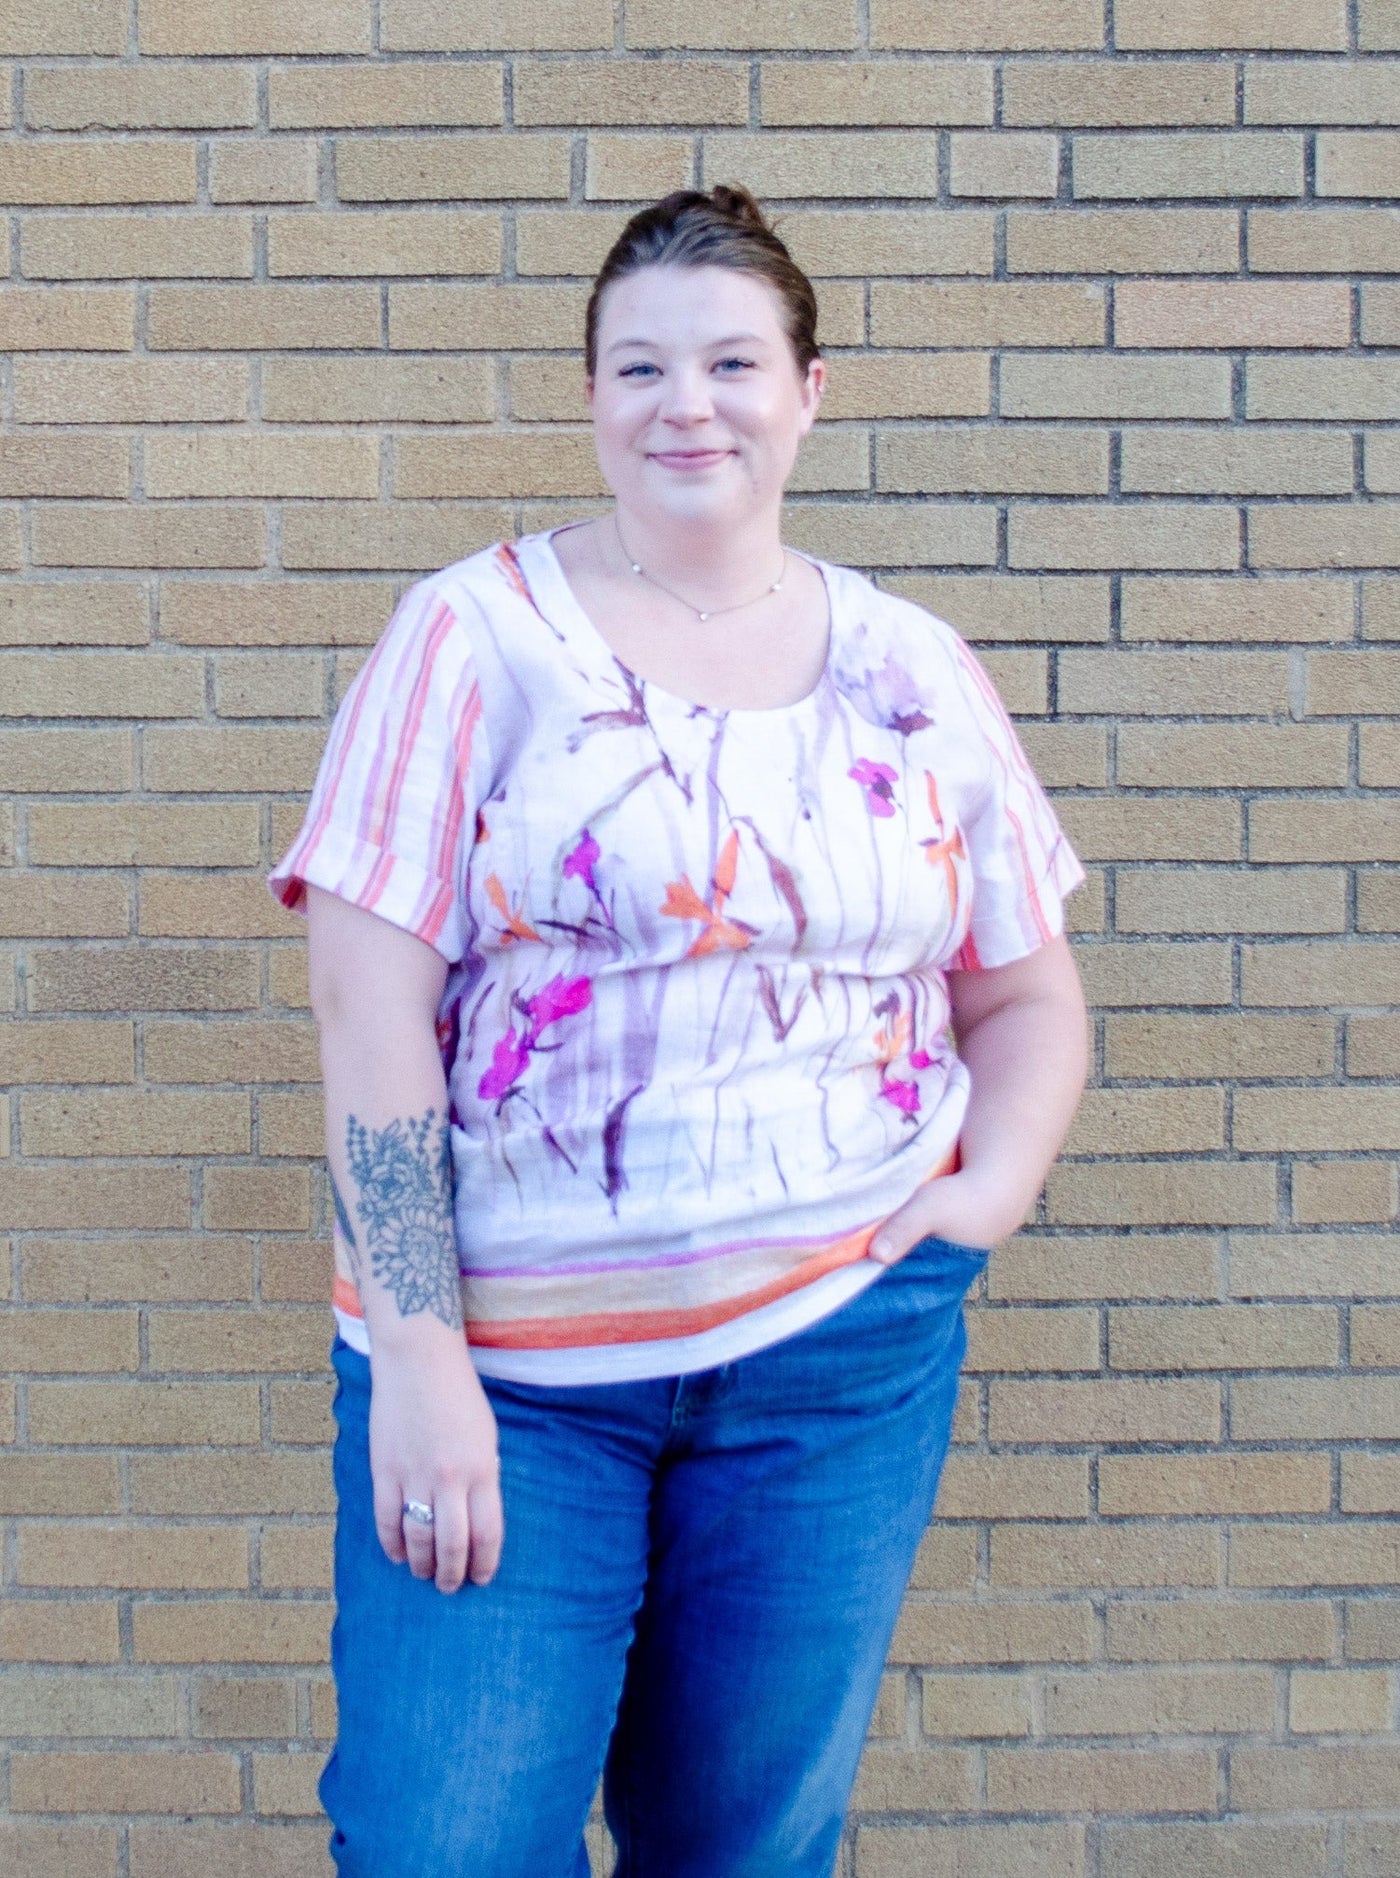 Model is wearing a linen pink and orange accented floral top paired with blue jeans.